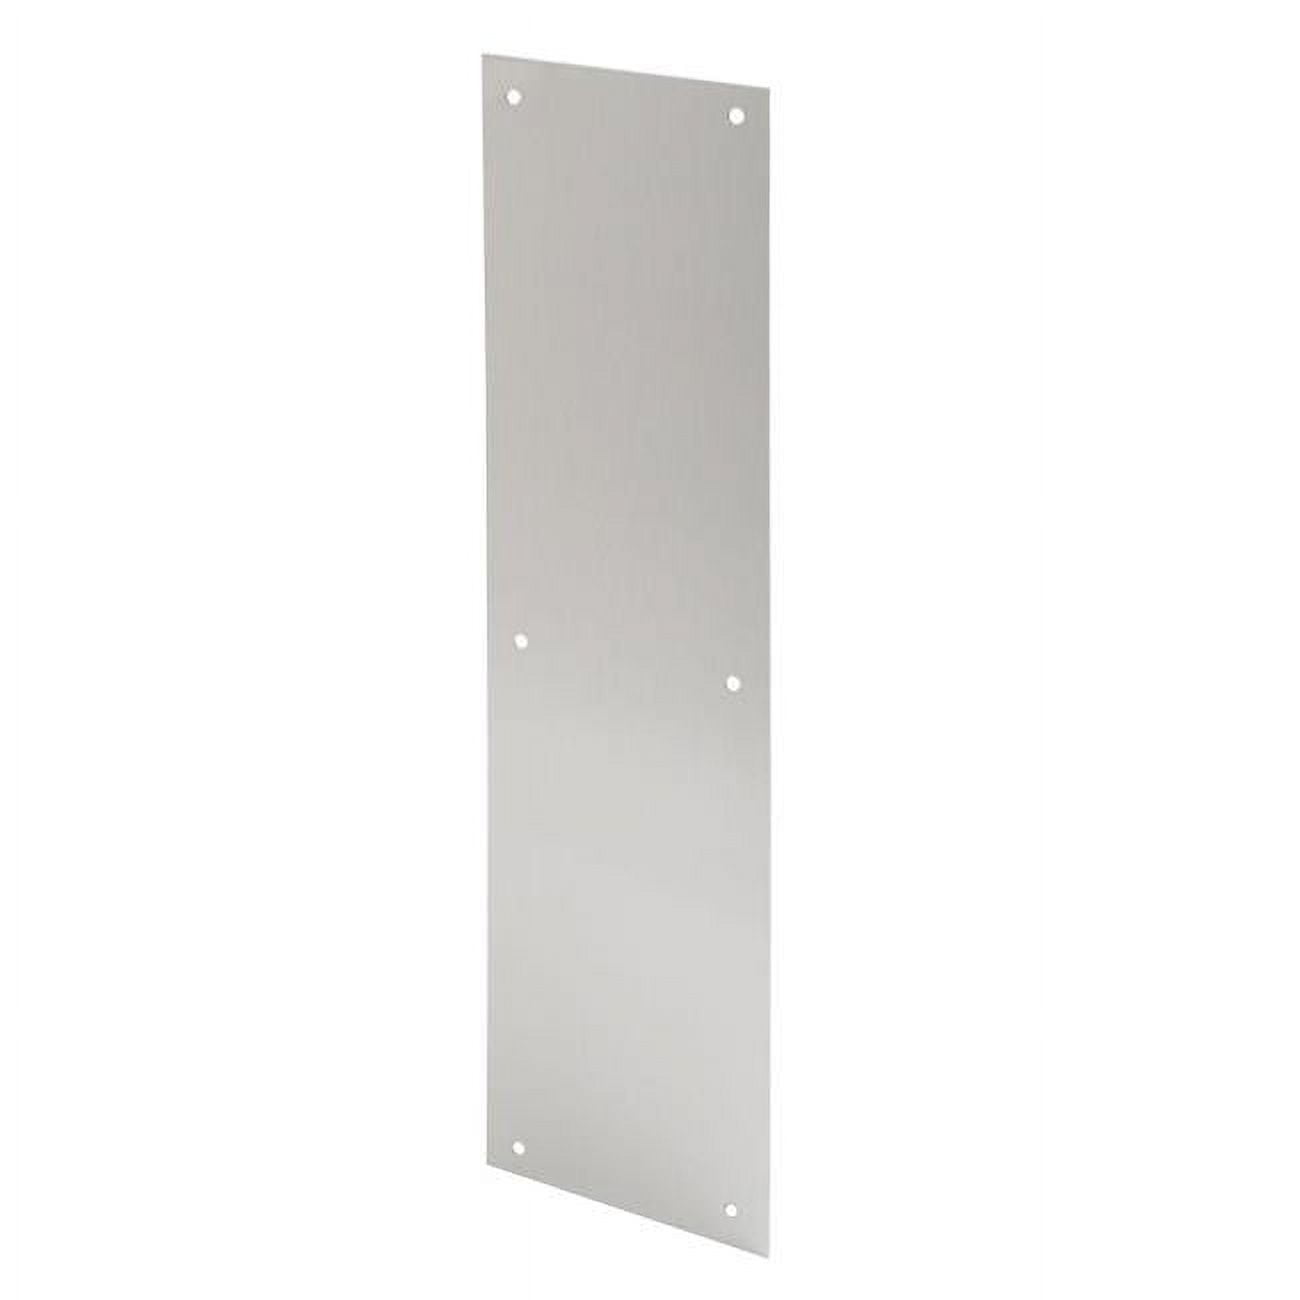 A07-p6340-605 3.5 X 15 In. Push Plate Set, Polished Brass